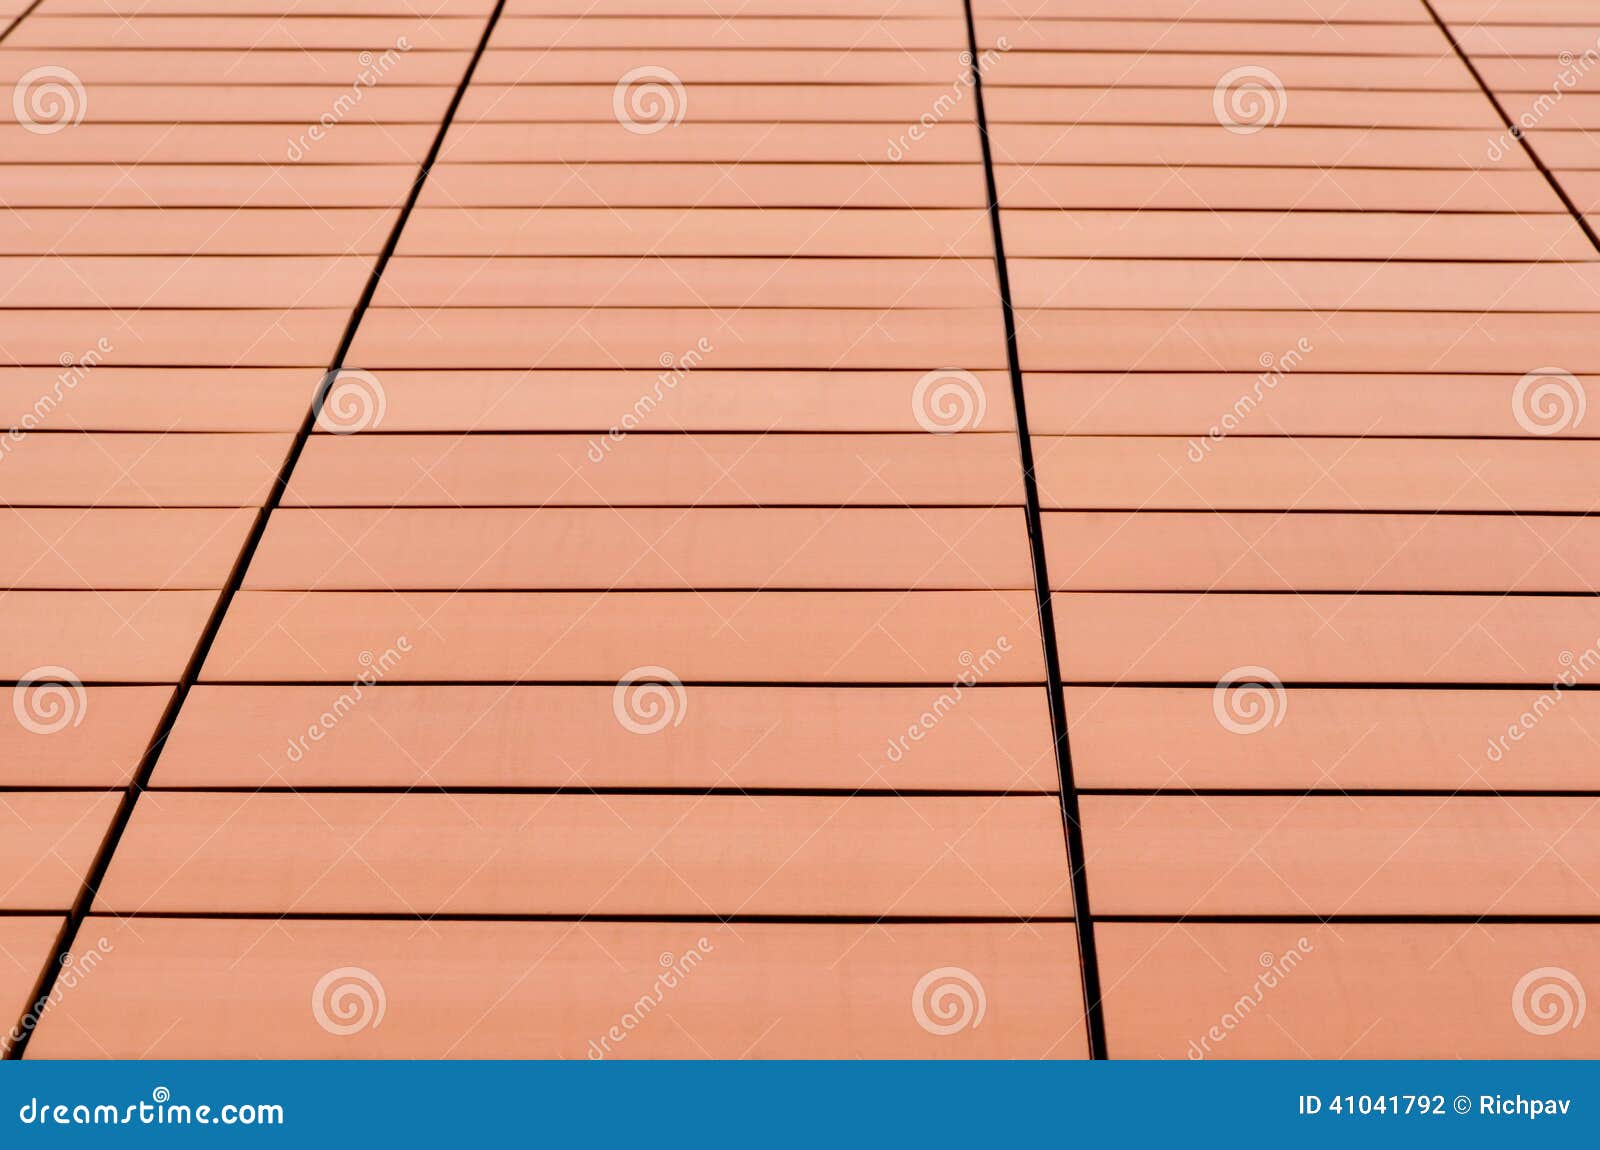 Orange tiles stock photo. Image of cracked, abstract - 41041792